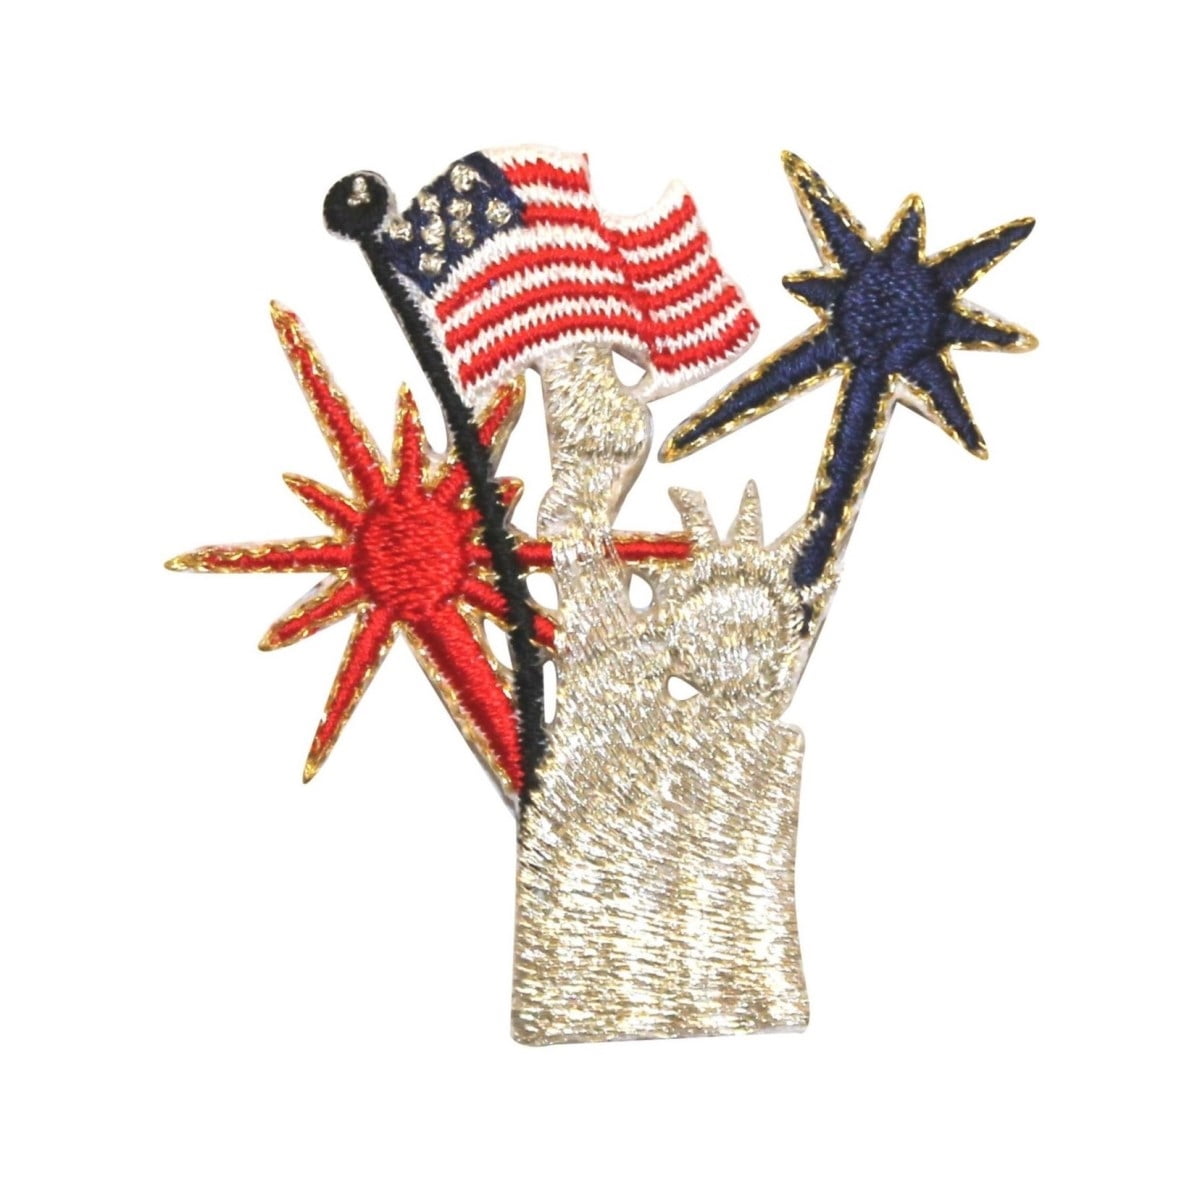 Statue Of Liberty New York City Iron On Embroidered Applique Patch 